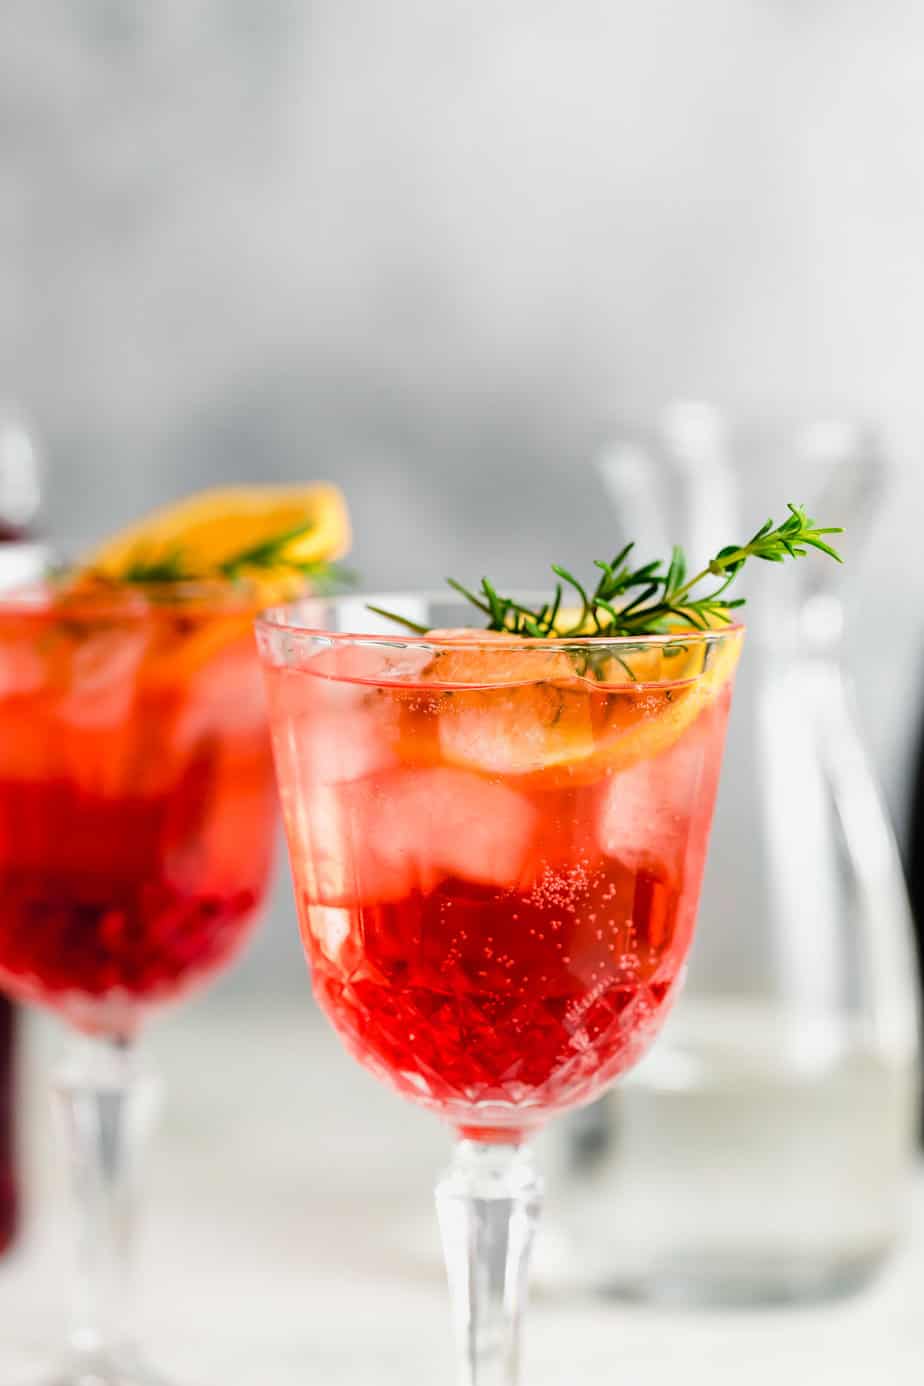 Aperol Spritz served with fresh herbs and oranges.